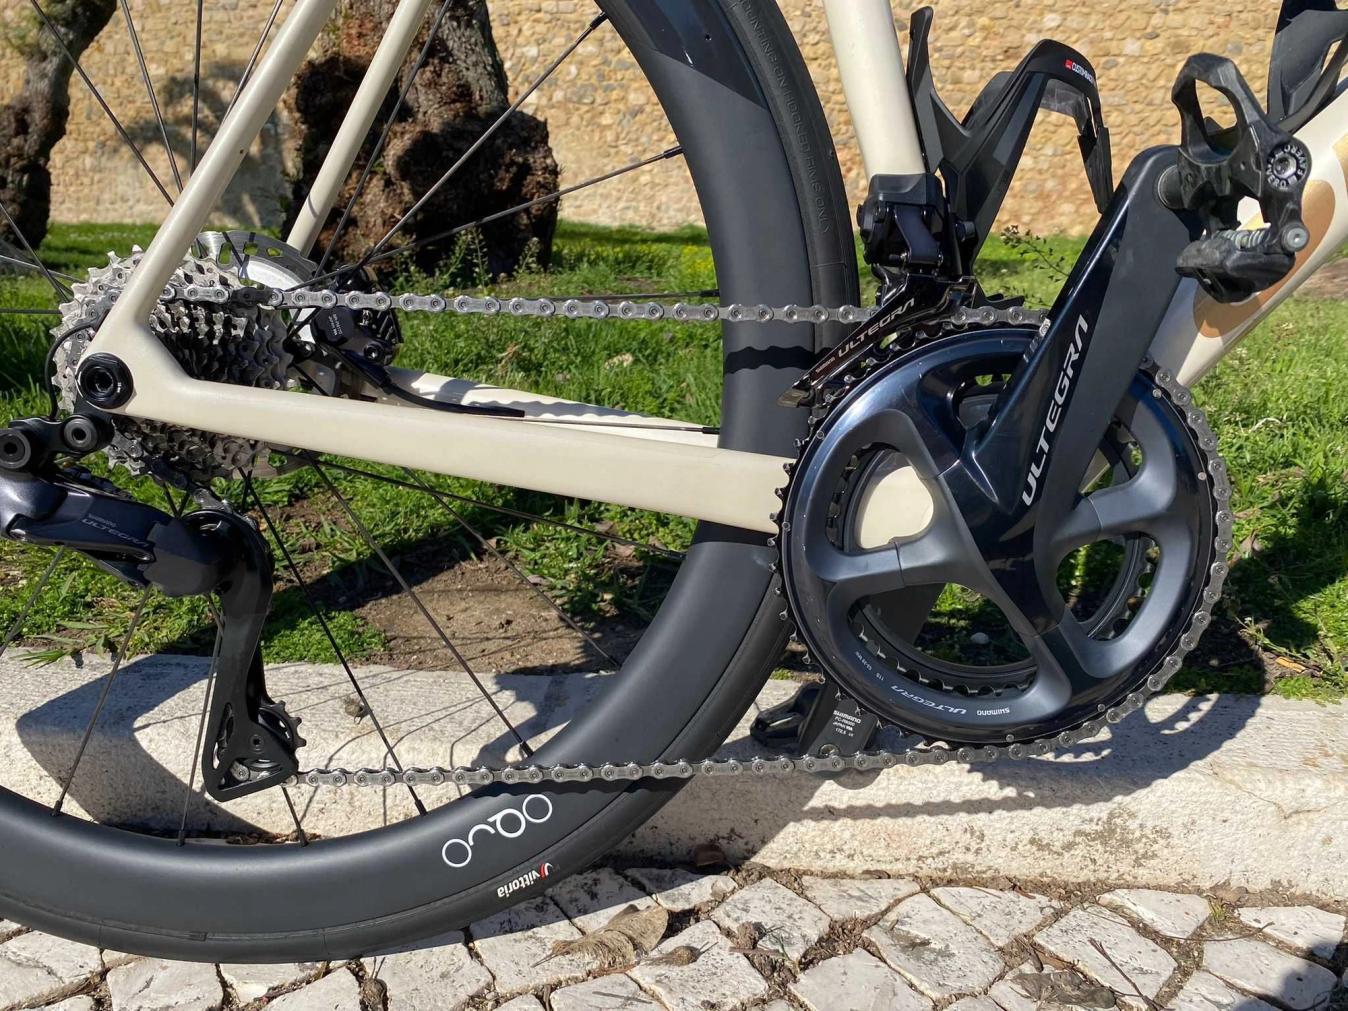 This is the older 11-speed version of Shimano's Ultegra groupset